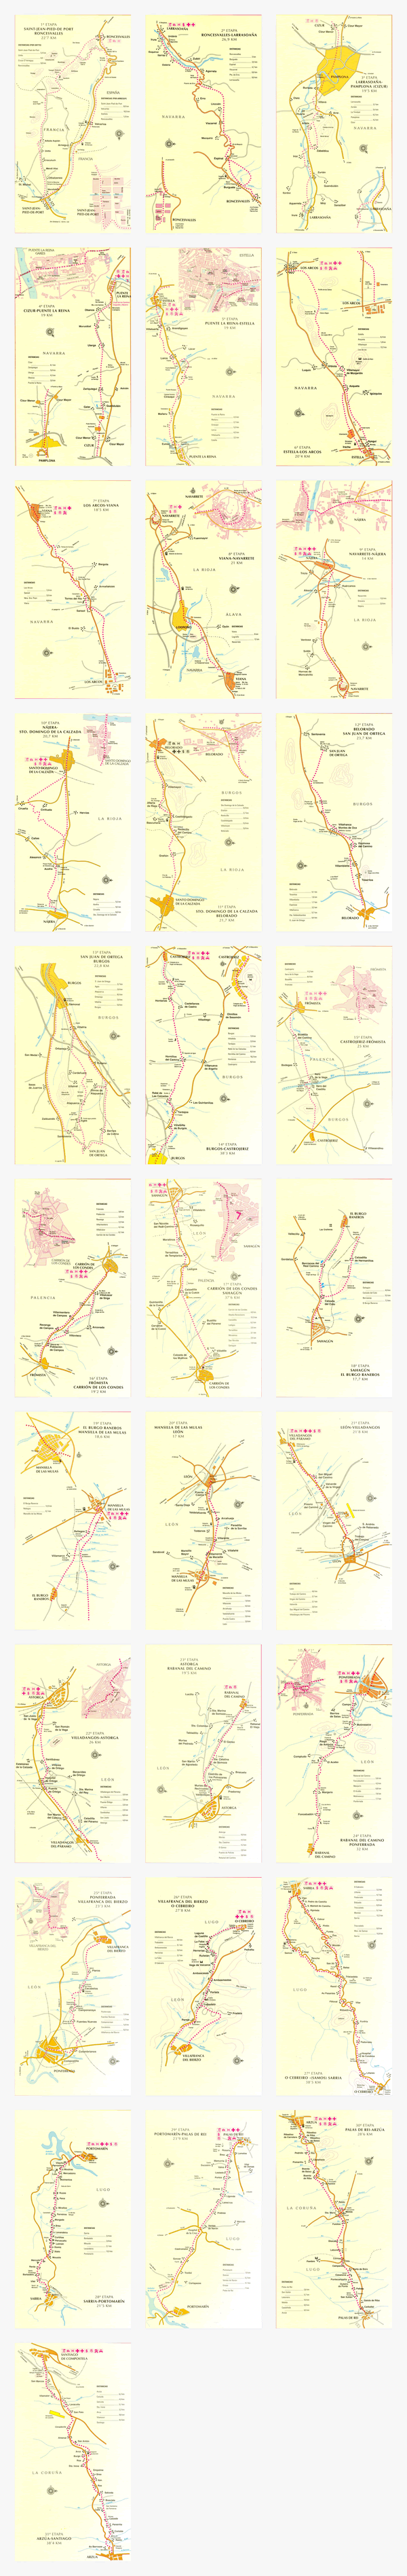 Click to download this entire series of Camino Francés maps